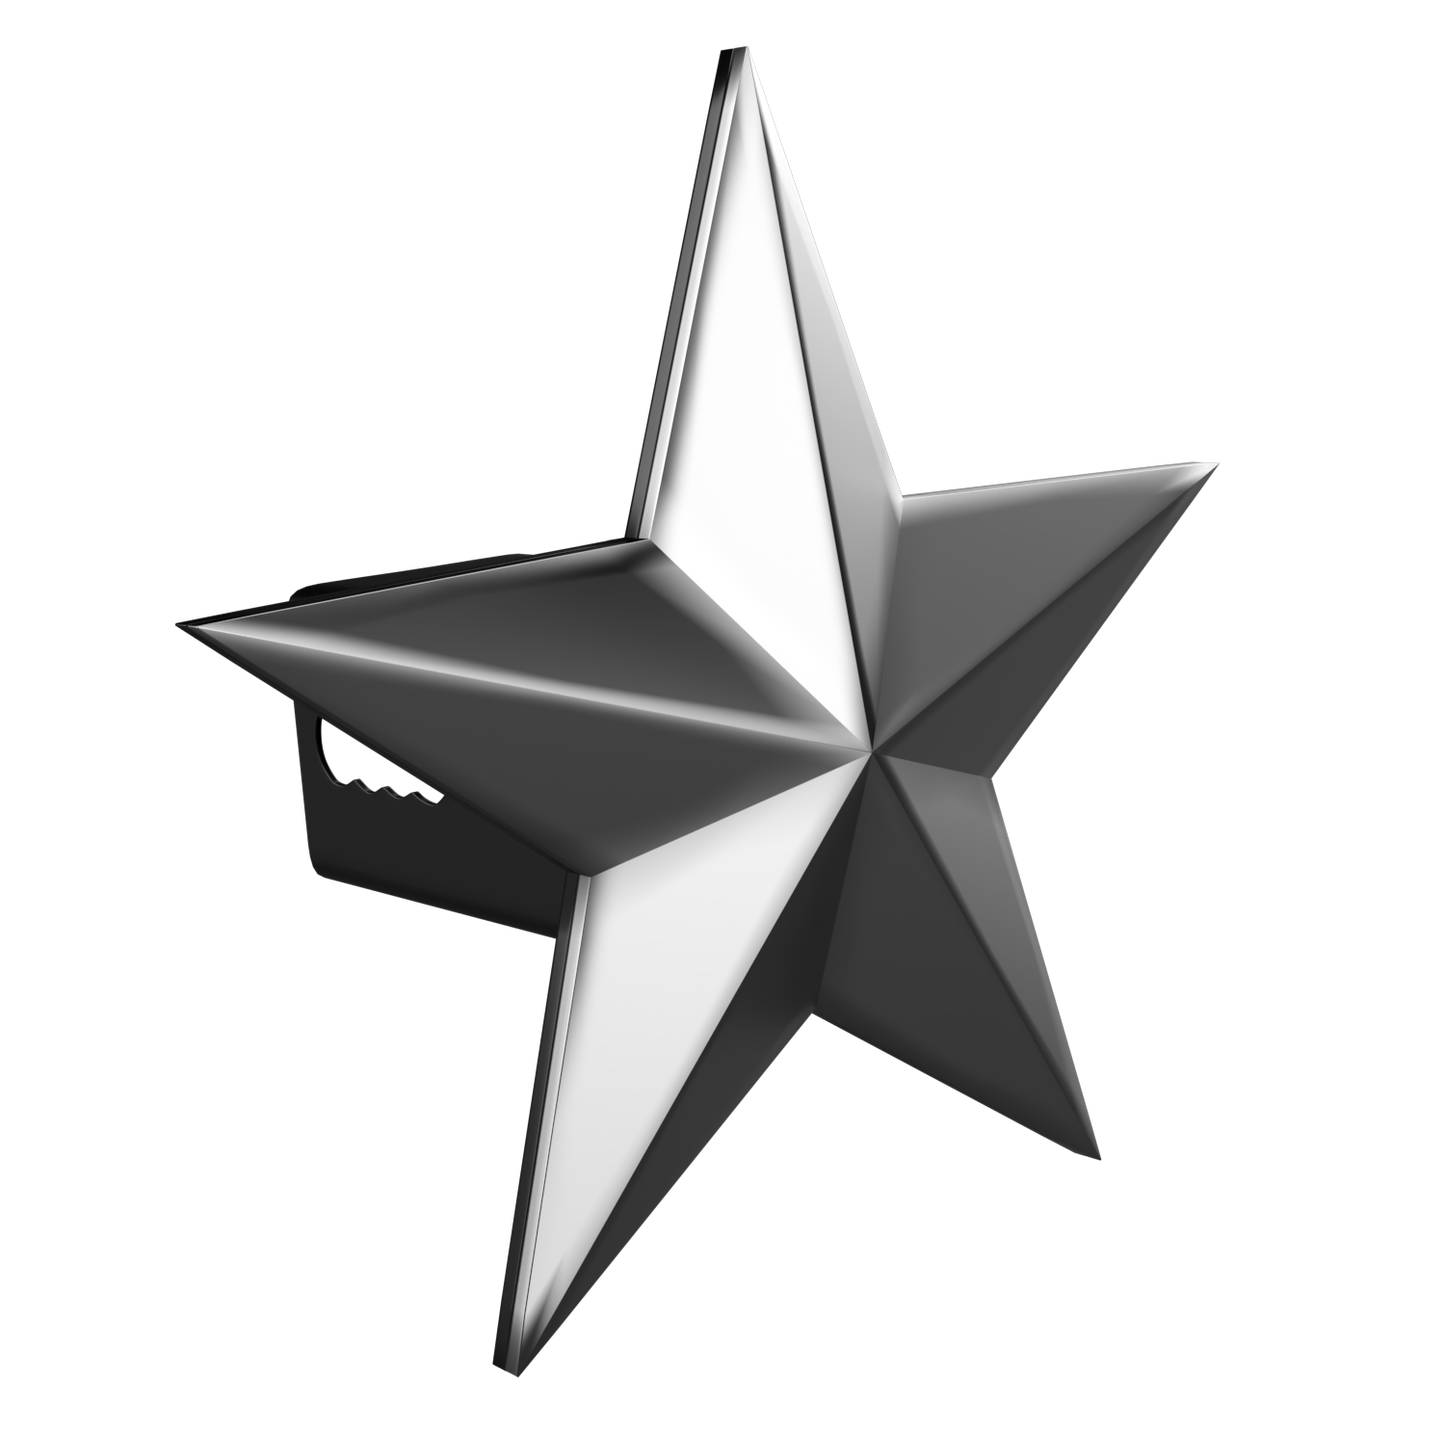 7" Texas 3D Five Point Star Metal Hitch Cover (Fits 2" 2.5" and 3" Receiver, Chrome)